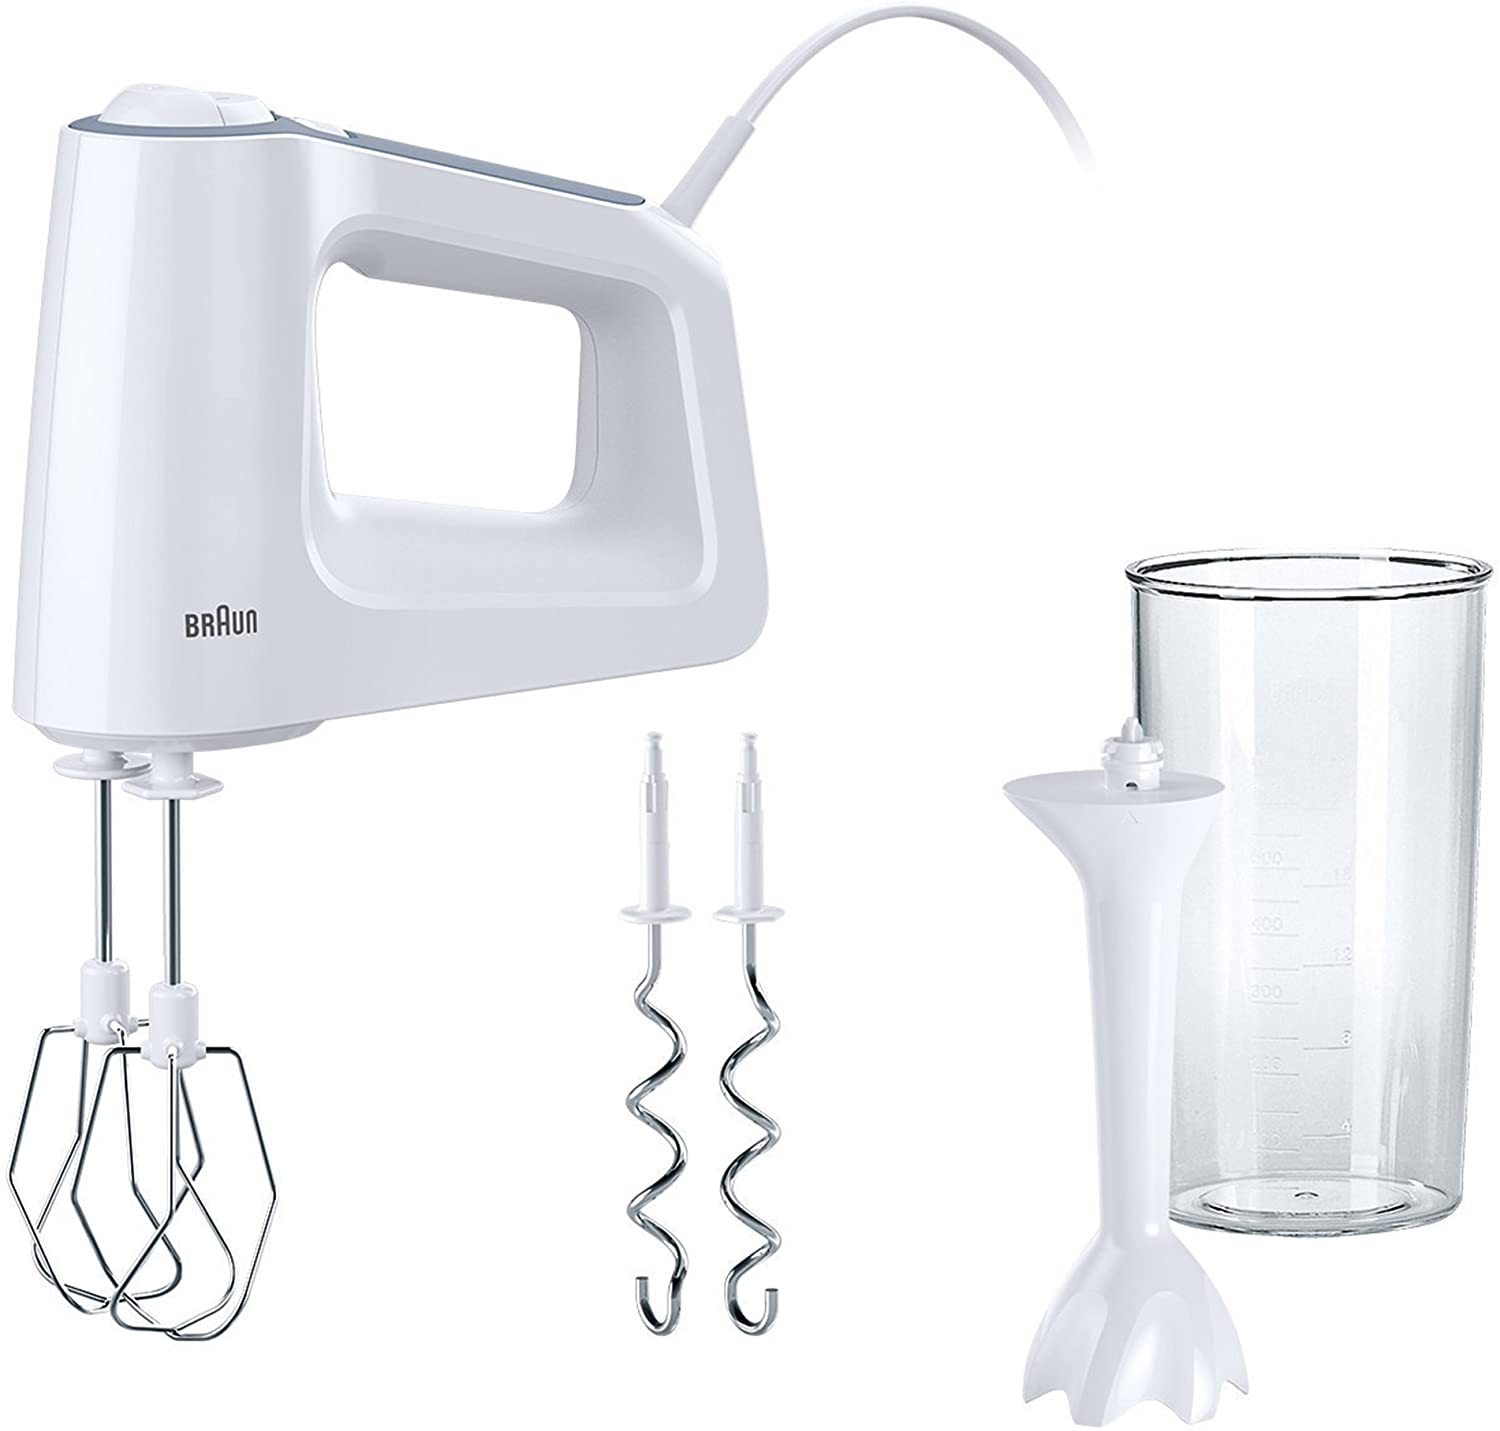 DeLonghi Braun MultiMix 3 HM 3105 Hand Mixer (500 Watt Hand Mixer, 5 Speed Levels + Turbo Function, Includes Whisk, Dough Hook, PowerBell Mixing Base and 600 ml Mixing and Measuring Cup) White